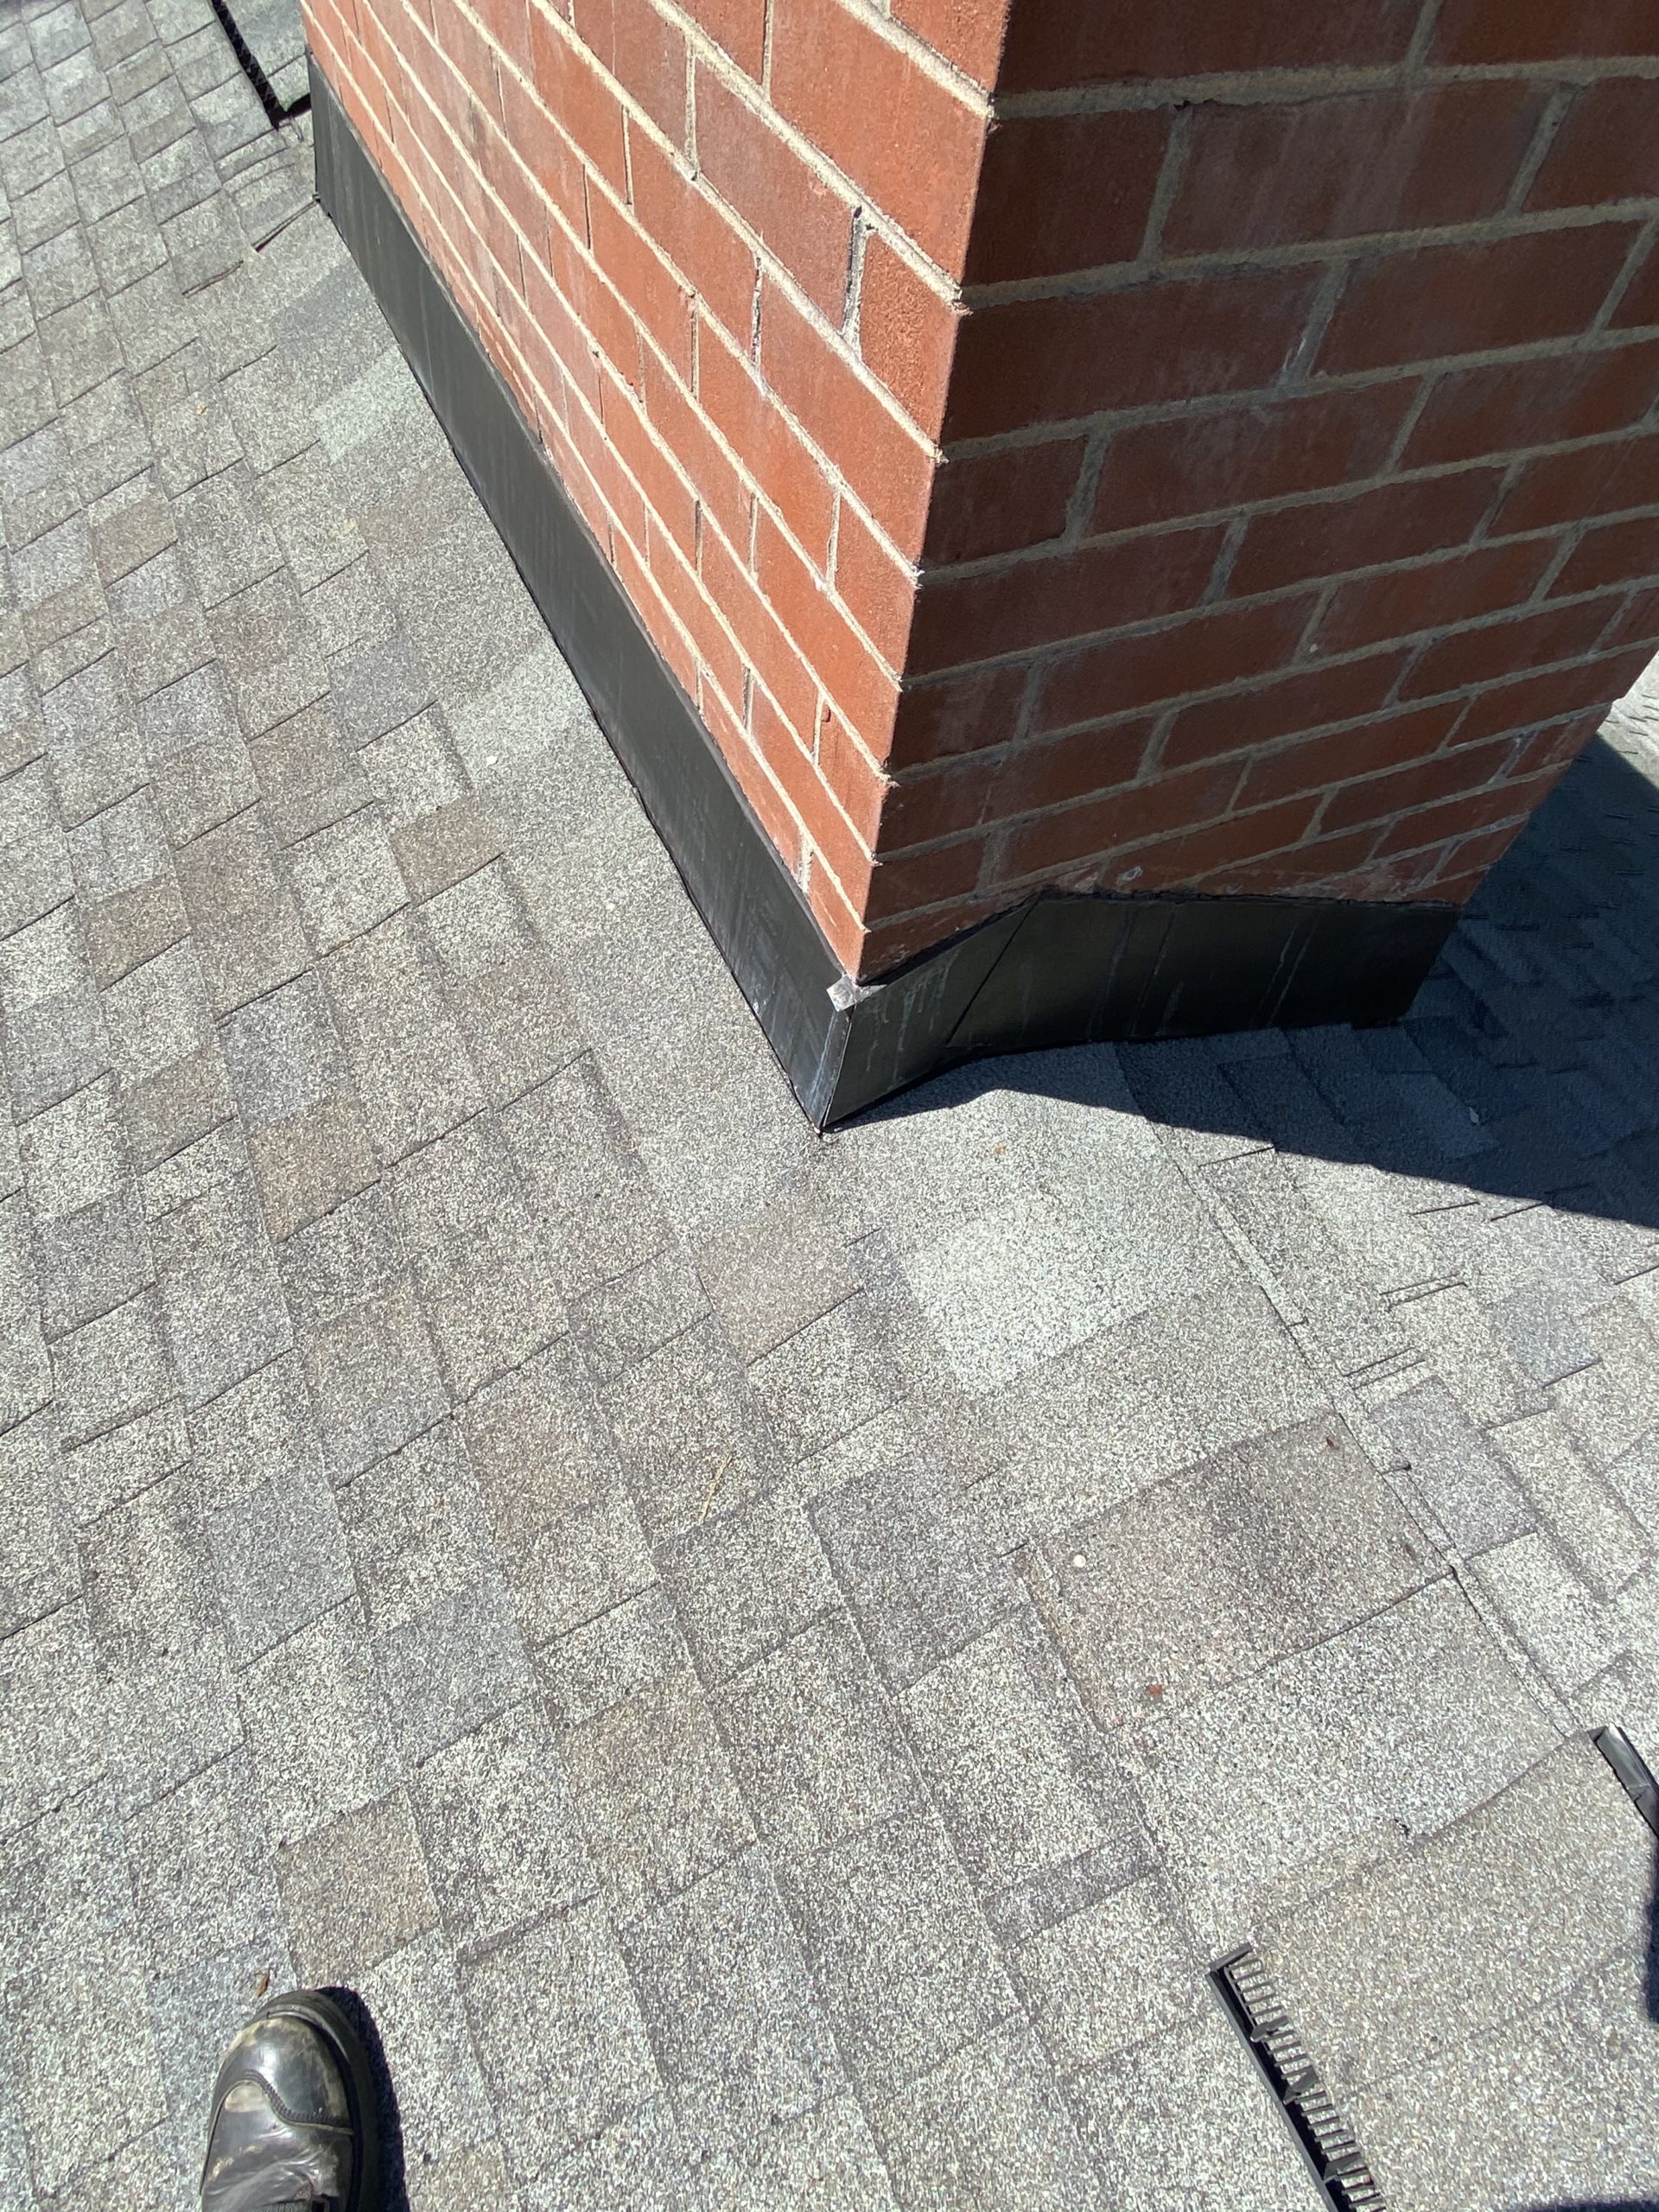 This is an image of bronzed colored chimney flashing on red brick.